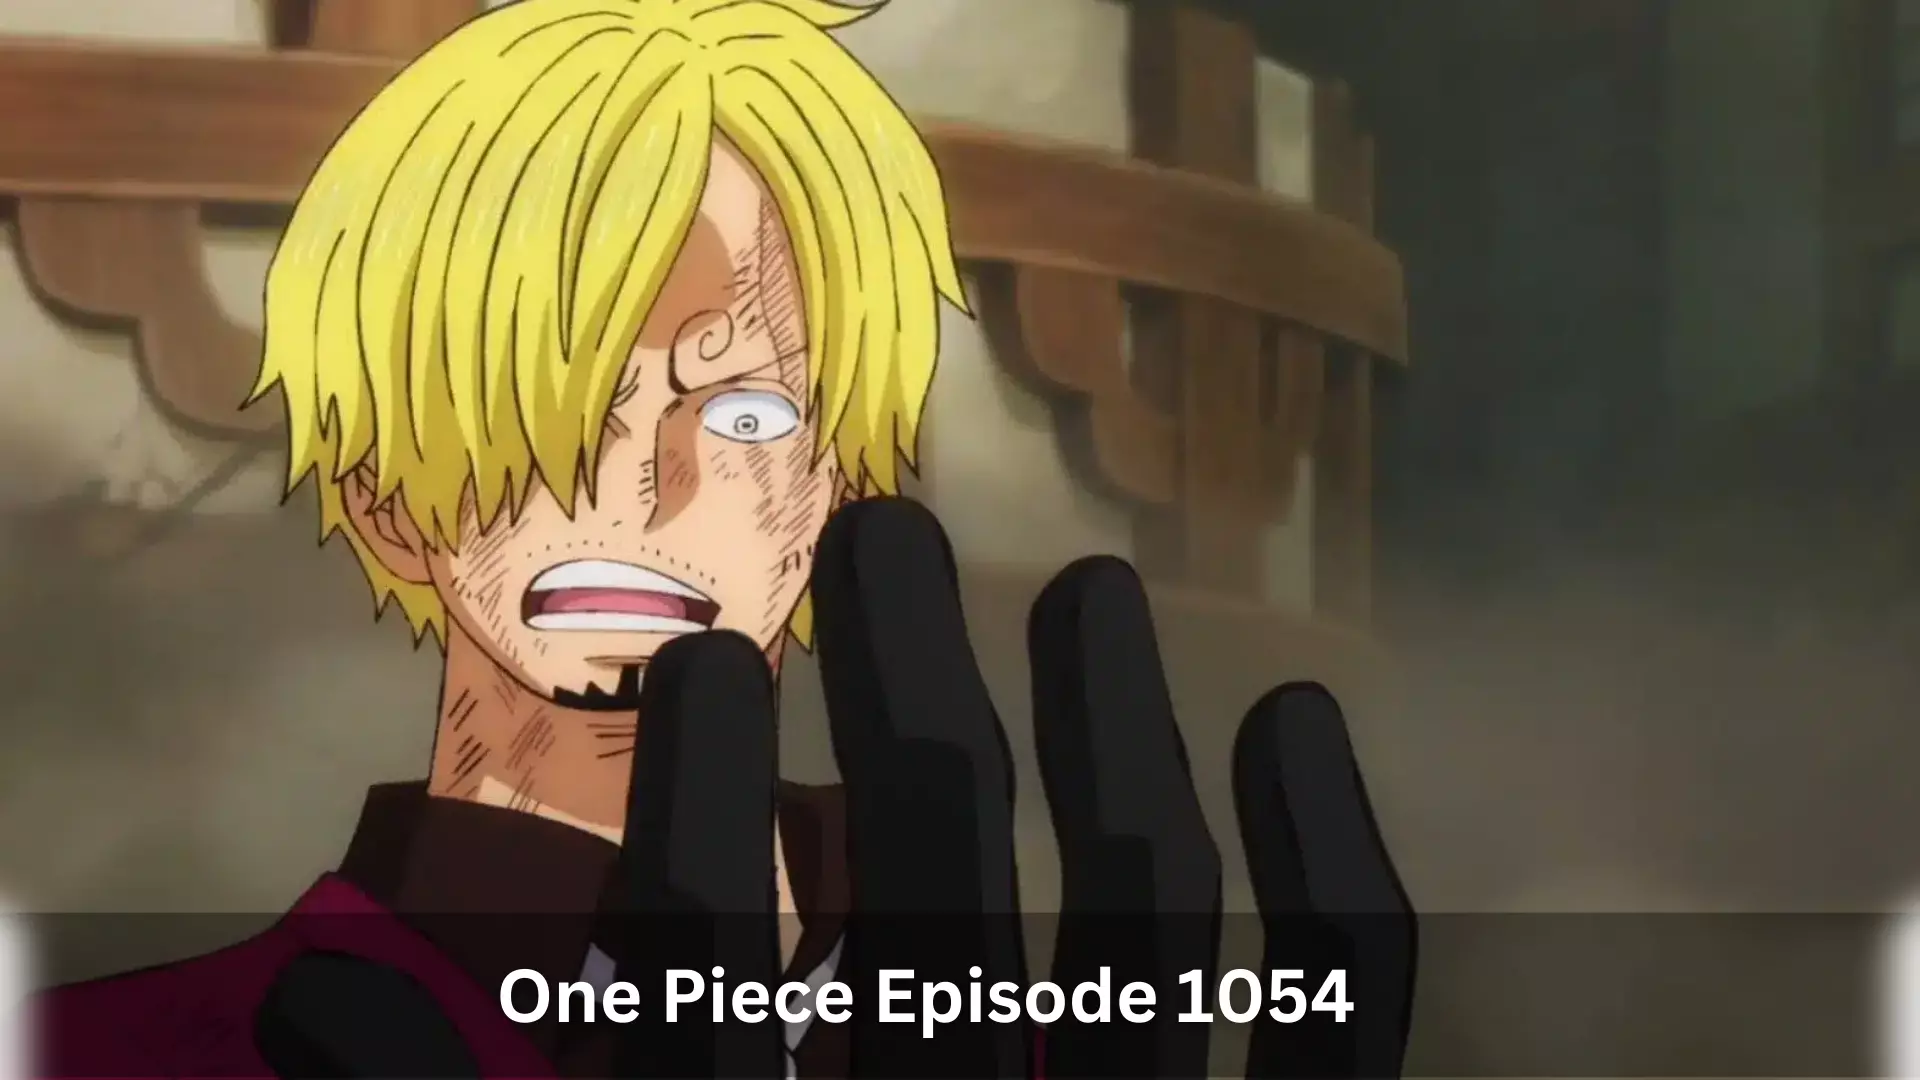 One Piece Episode 1054 Release Date & Time, Recap, Spoiler, and Where